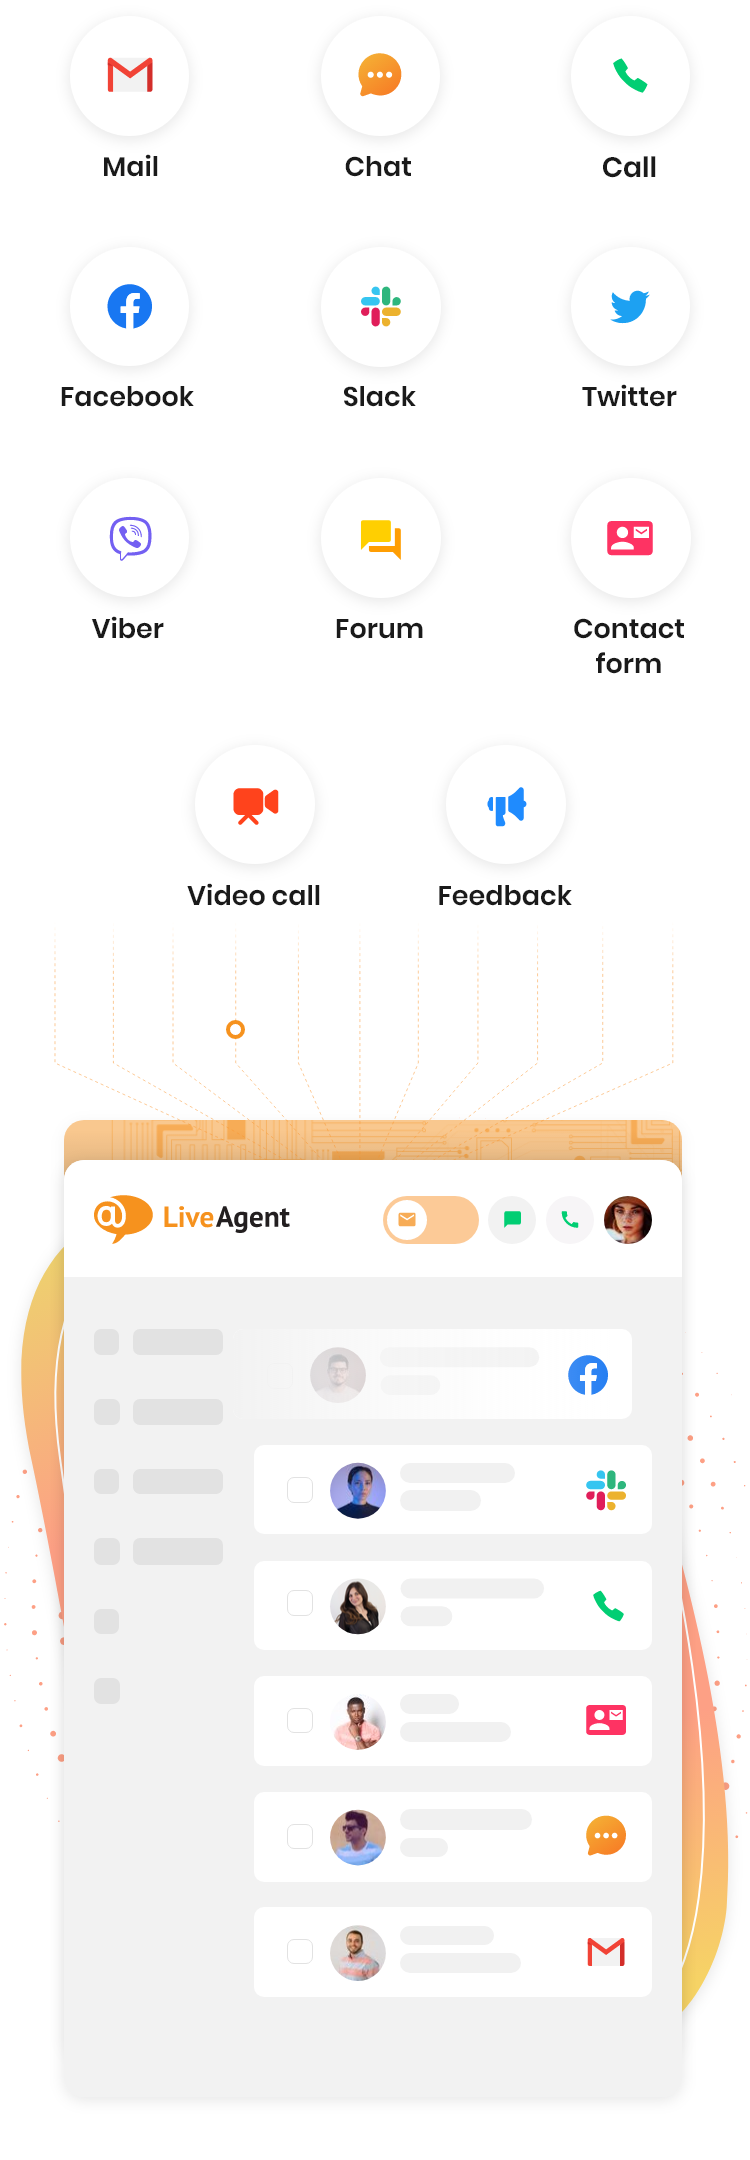 LiveAgent streamlines multiple customer service channels into one piece of software